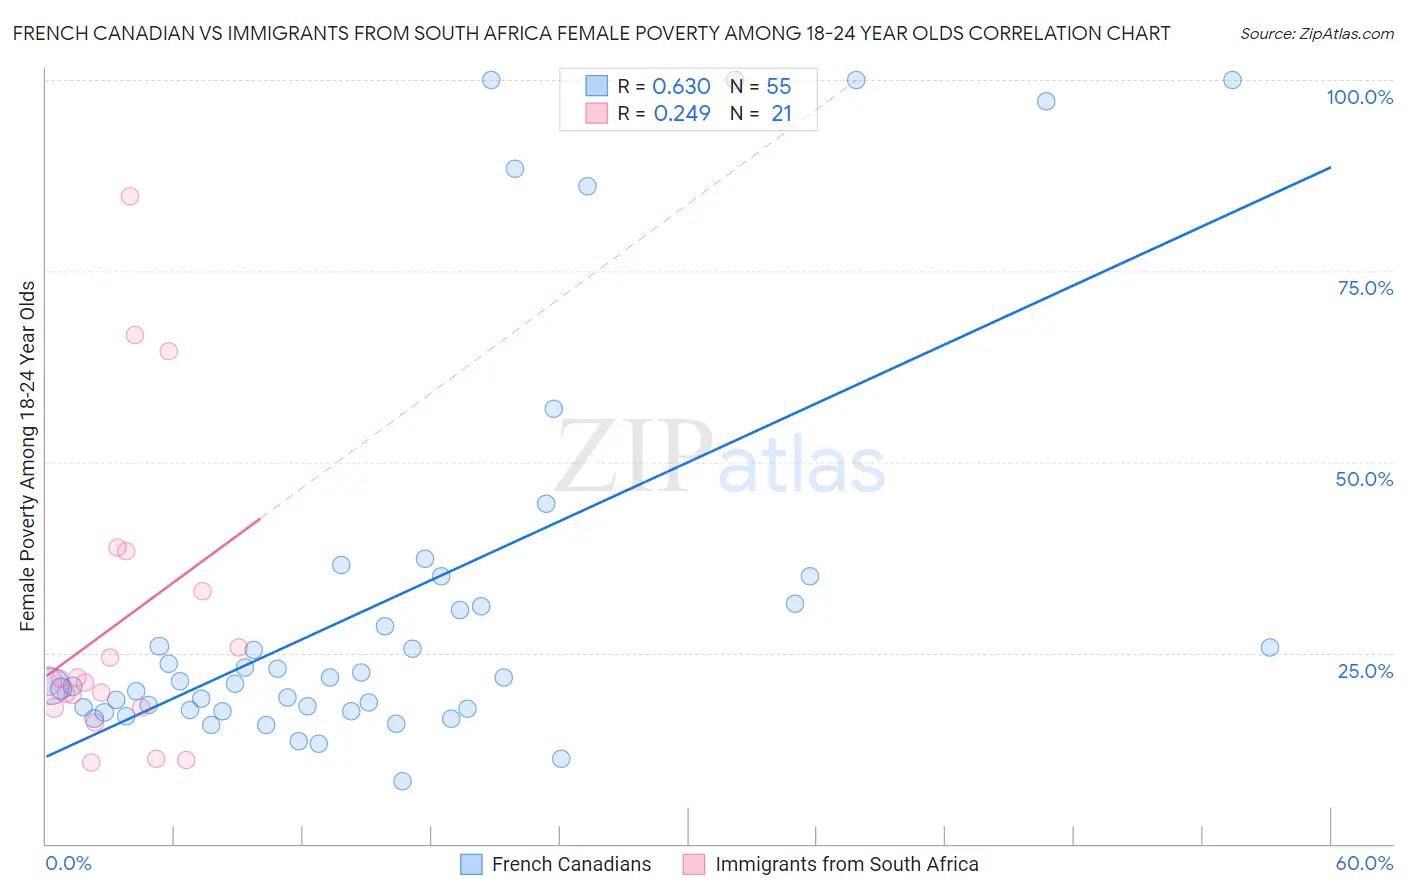 French Canadian vs Immigrants from South Africa Female Poverty Among 18-24 Year Olds